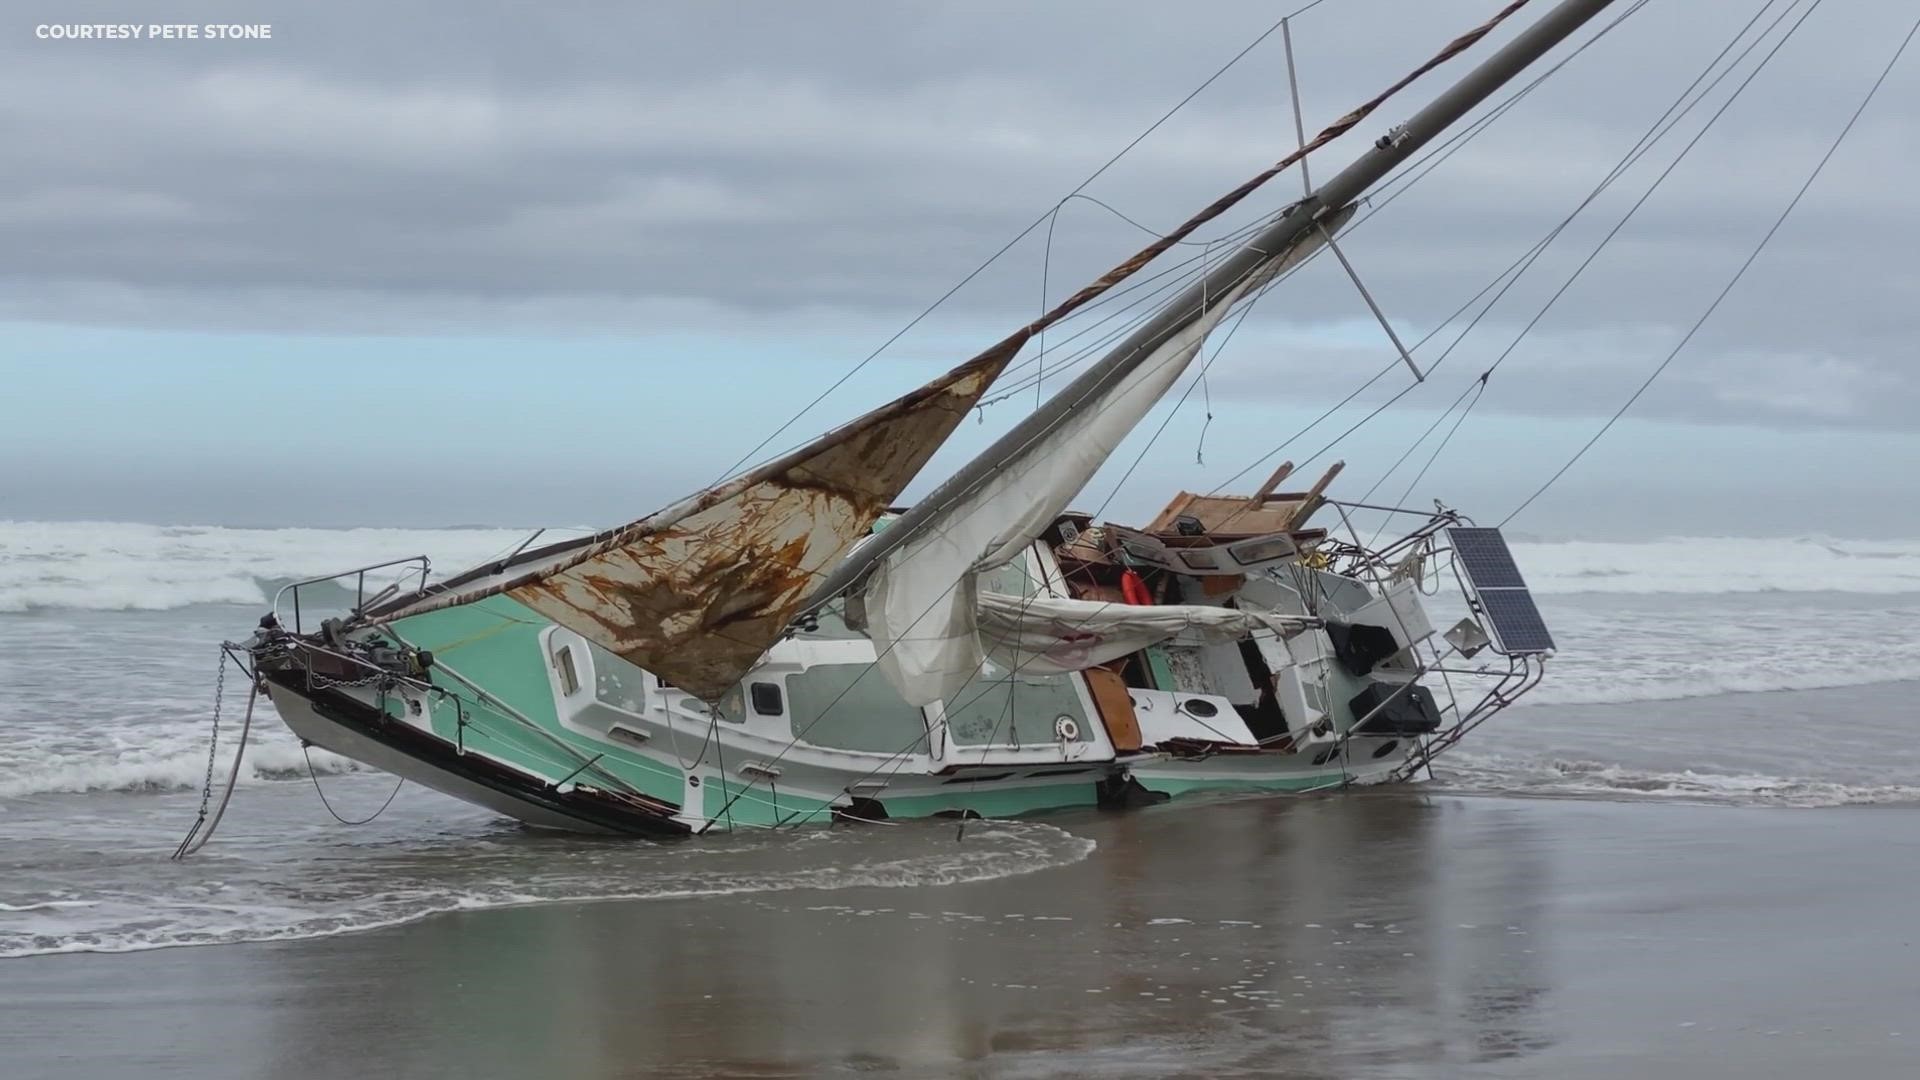 A sailboat washed up at Nedonna Beach, Ore., just north of Rockaway Beach, on Sunday, Oct. 3, 2021. Two bodies were found in the water near the boat, the USGS said.